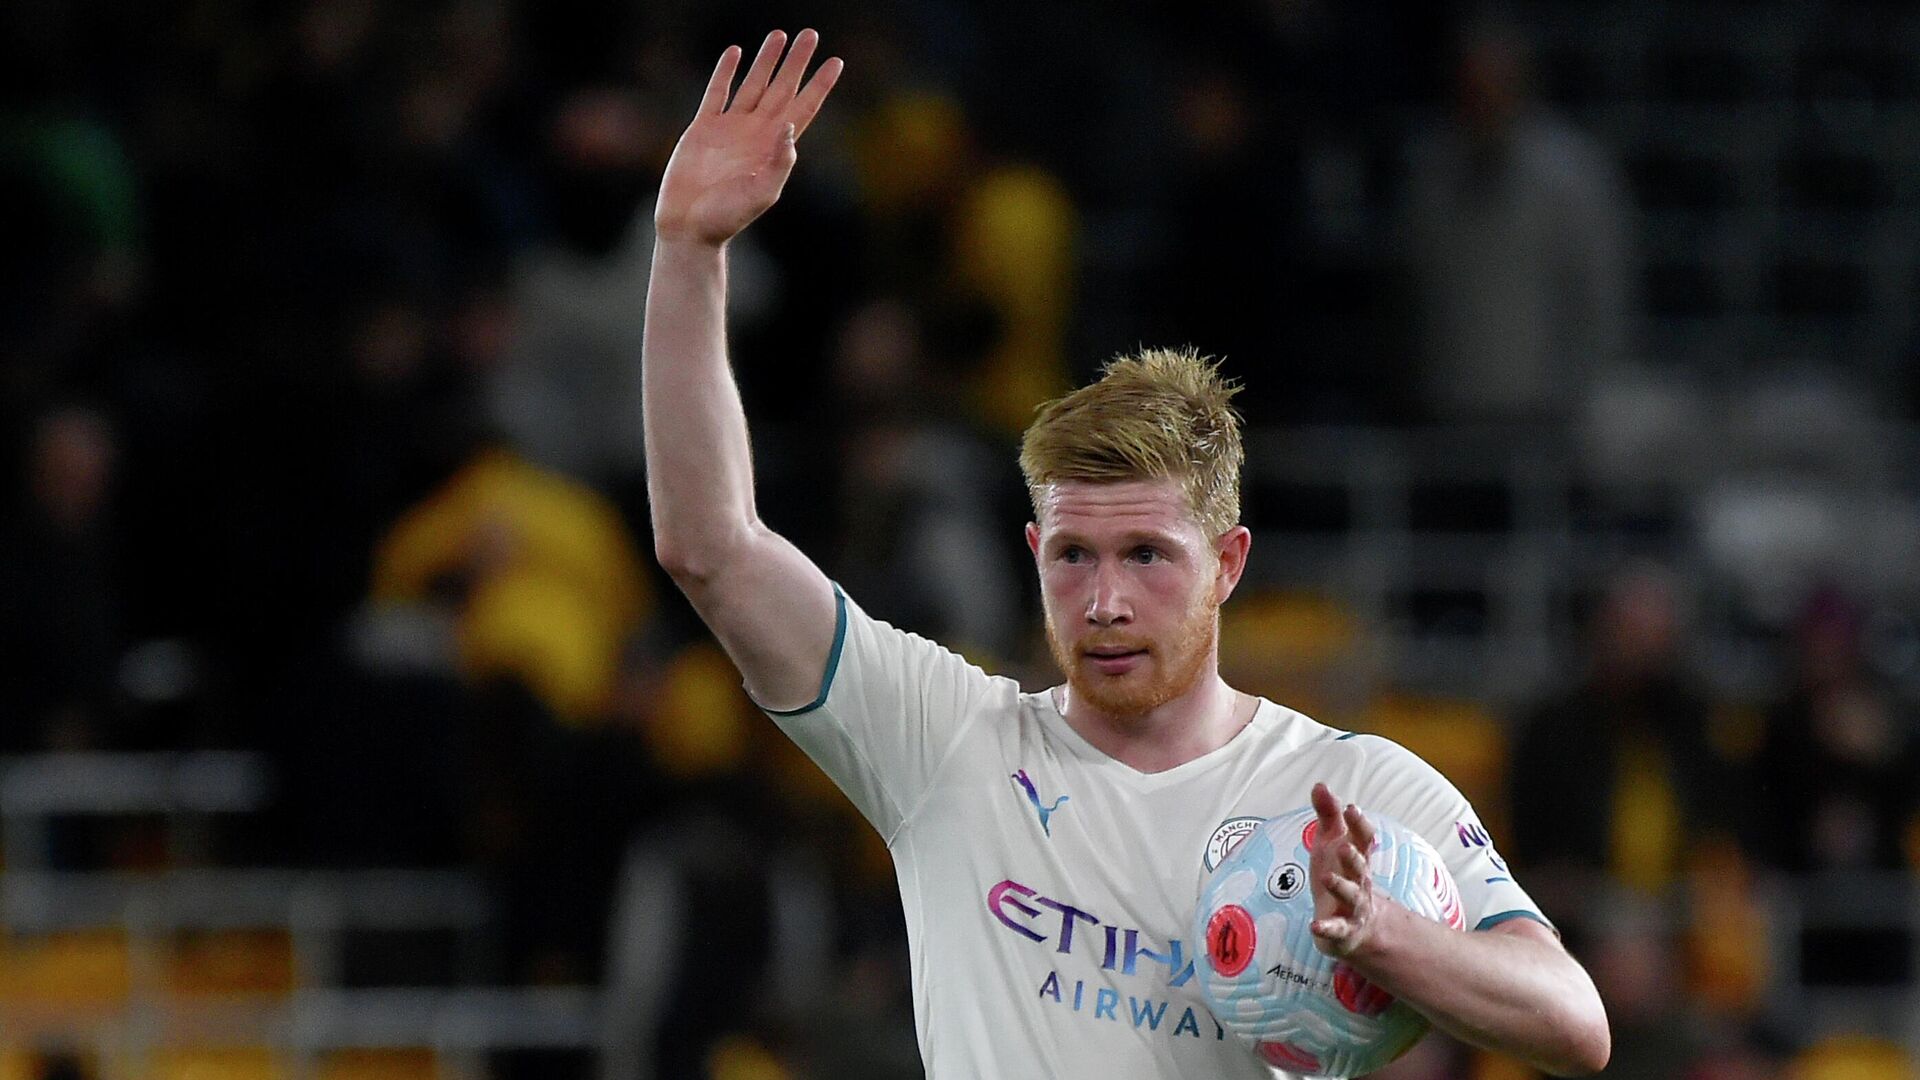 Manchester City's Kevin De Bruyne leaves the field with the match ball at the end of the English Premier League soccer match between Wolverhampton Wanderers and Manchester City at Molineux stadium in Wolverhampton, England, Wednesday, May 11, 2022 - Sputnik International, 1920, 12.05.2022